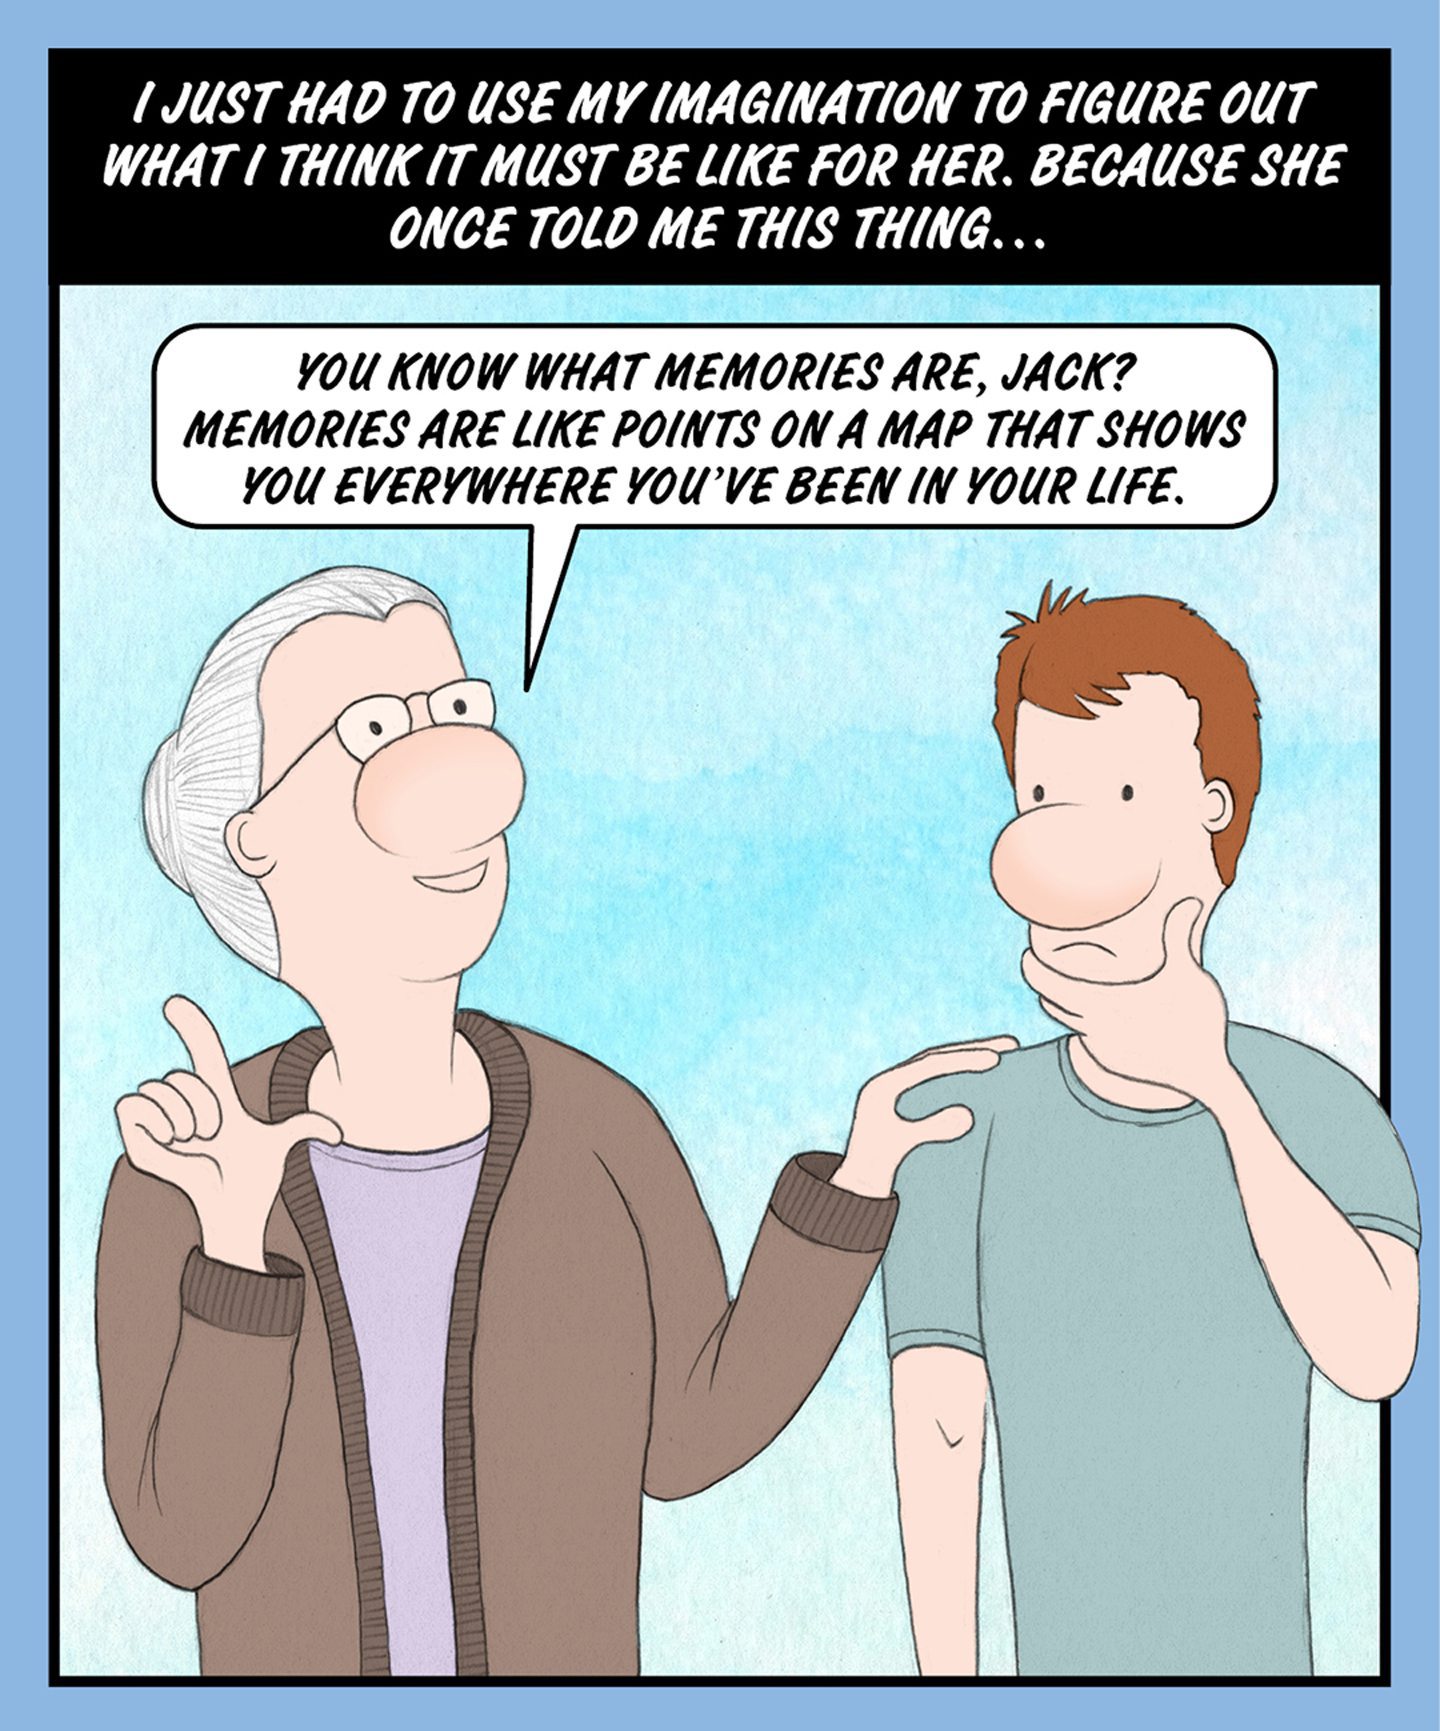 A comic illustration of a granny and a young man standing beside each other. The speech bubble from the granny reads: YOU KNOW WHAT MEMORIES ARE, JACK? MEMORIES ARE LIKE POINTS ON A MAP THAT SHOWS YOU EVERYWHERE YOU'VE BEEN IN YOUR LIFE. 
The text above the image reads: I JUST HAD TO USE MY IMAGINATION TO FIGURE OUT WHAT I THINK IT MUST BE LIKE FOR HER. BECAUSE SHE ONCE TOLD ME THIS THING…